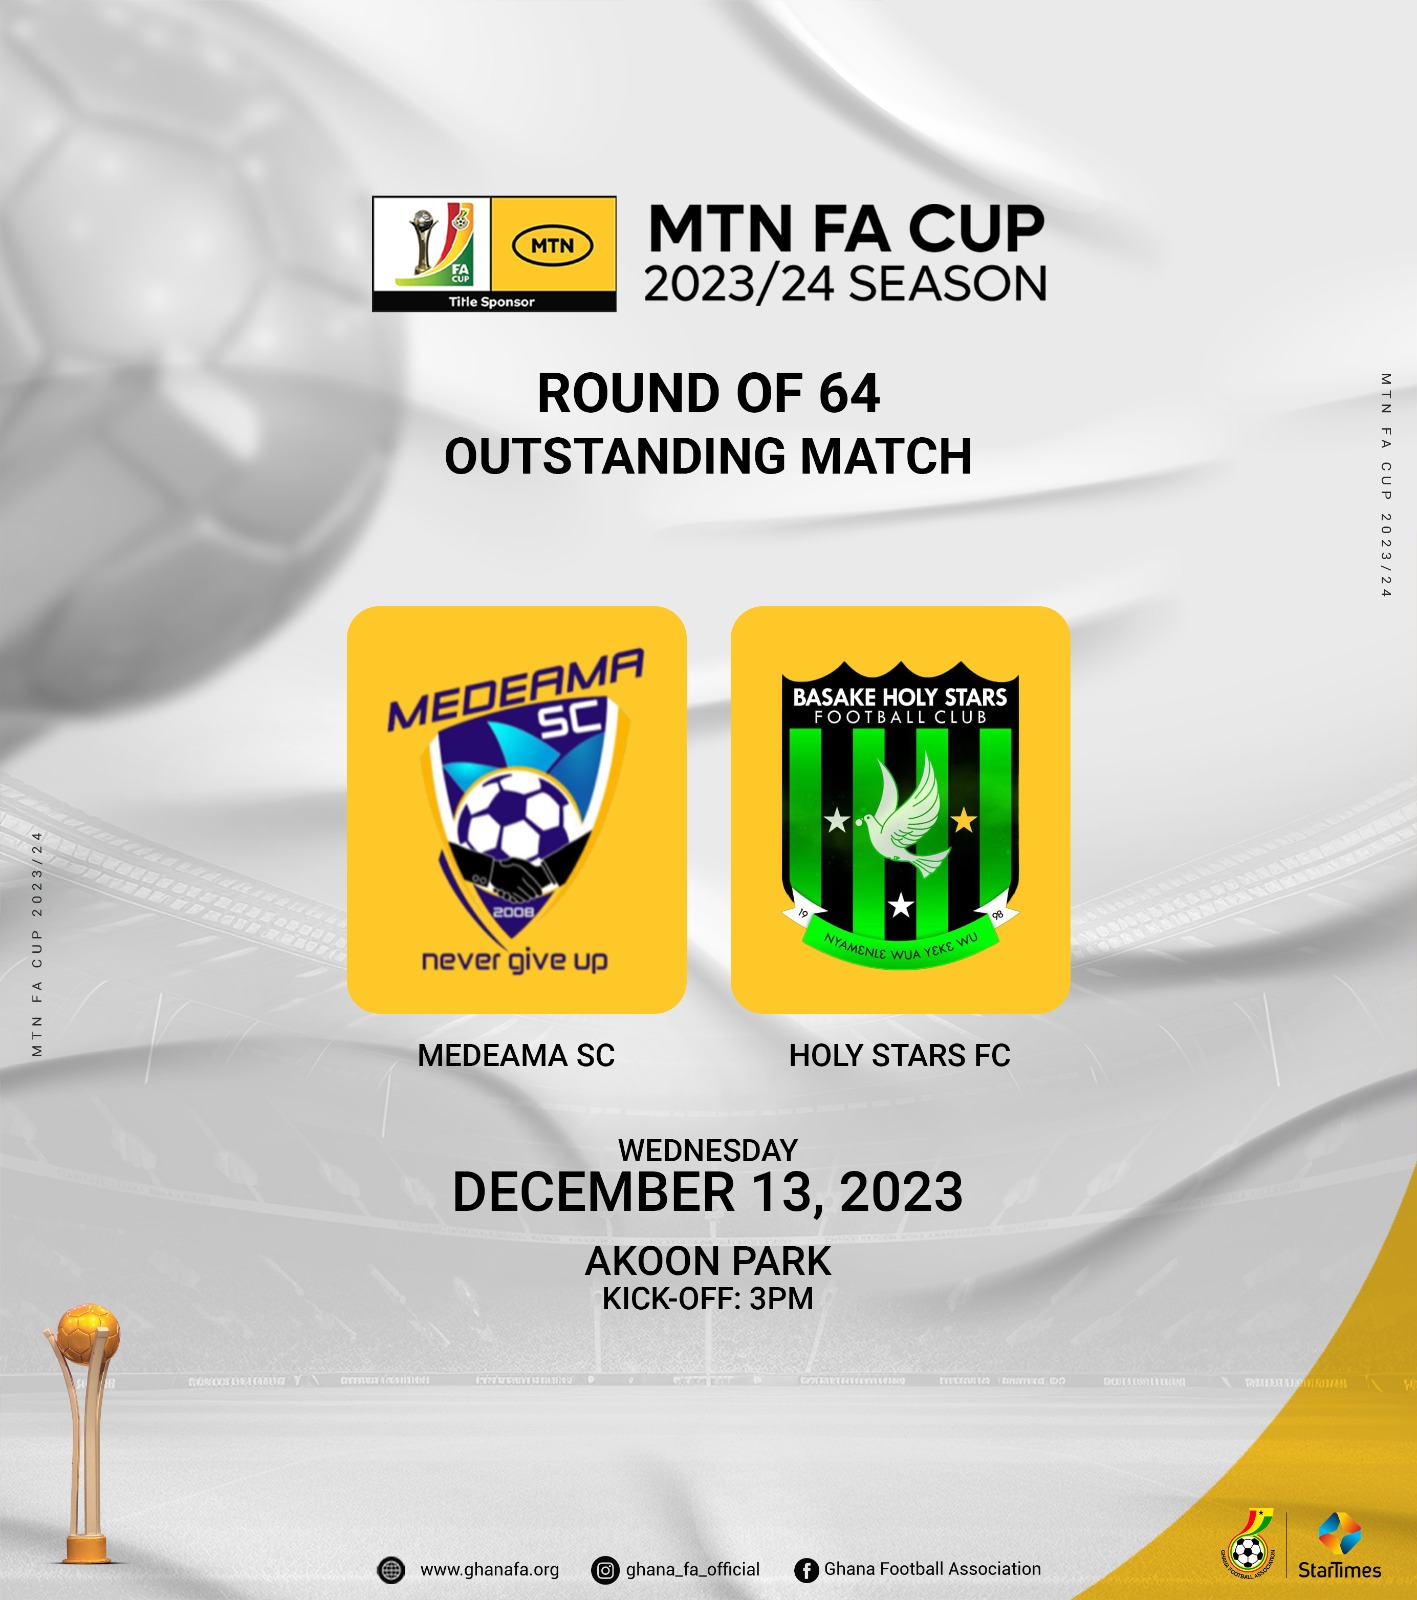 MTN FA Cup: Medeama SC take on Basake Holy Stars in outstanding R64 game Wednesday